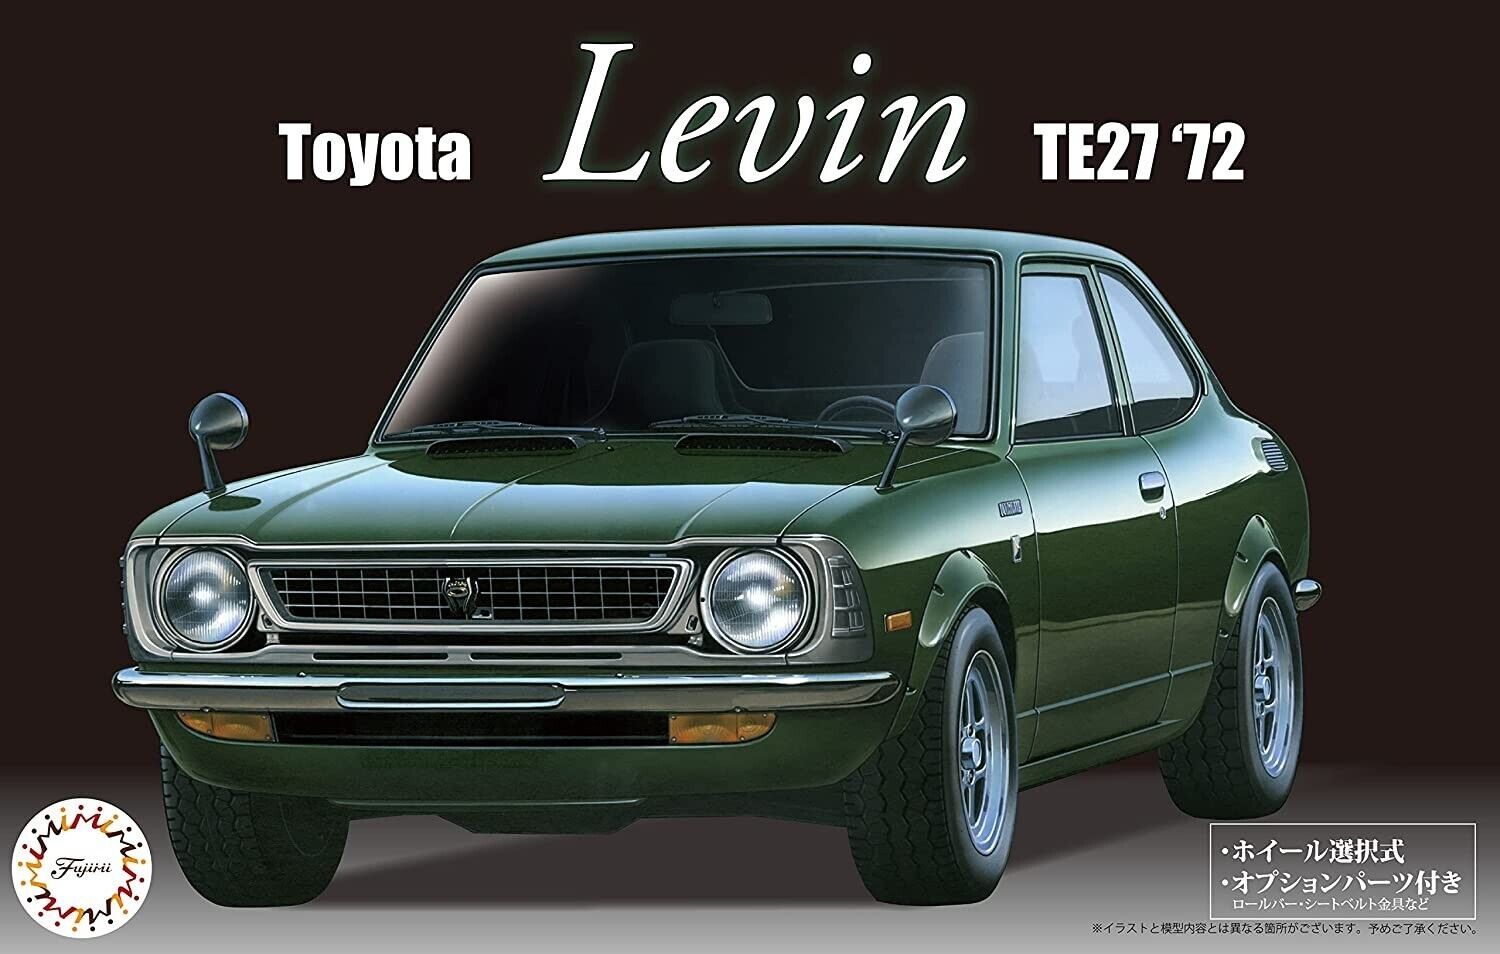 Fujimi ID-53 1/24 Toyota Corolla TE27 LEVIN 1972 Limited Ver. from Japan - $100.87